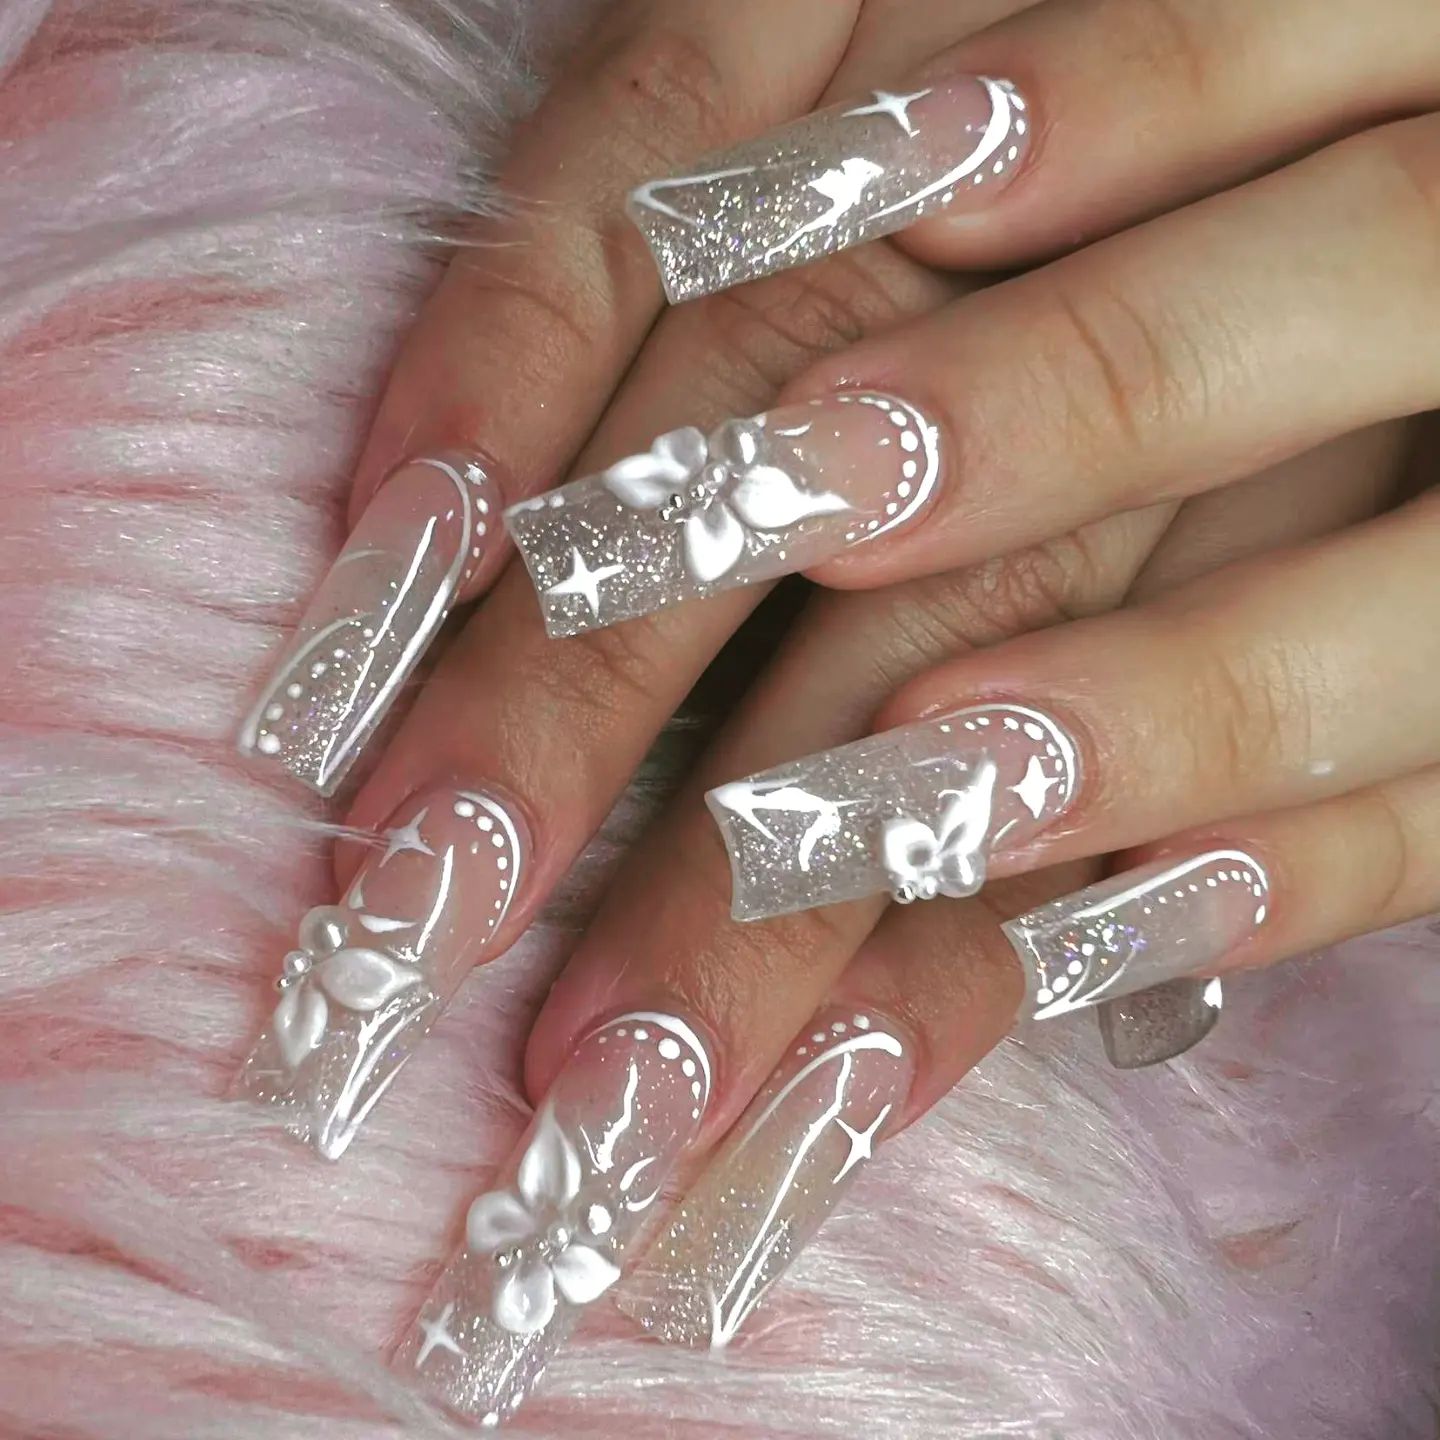 Clear Glitter Nails with Butterfly Design